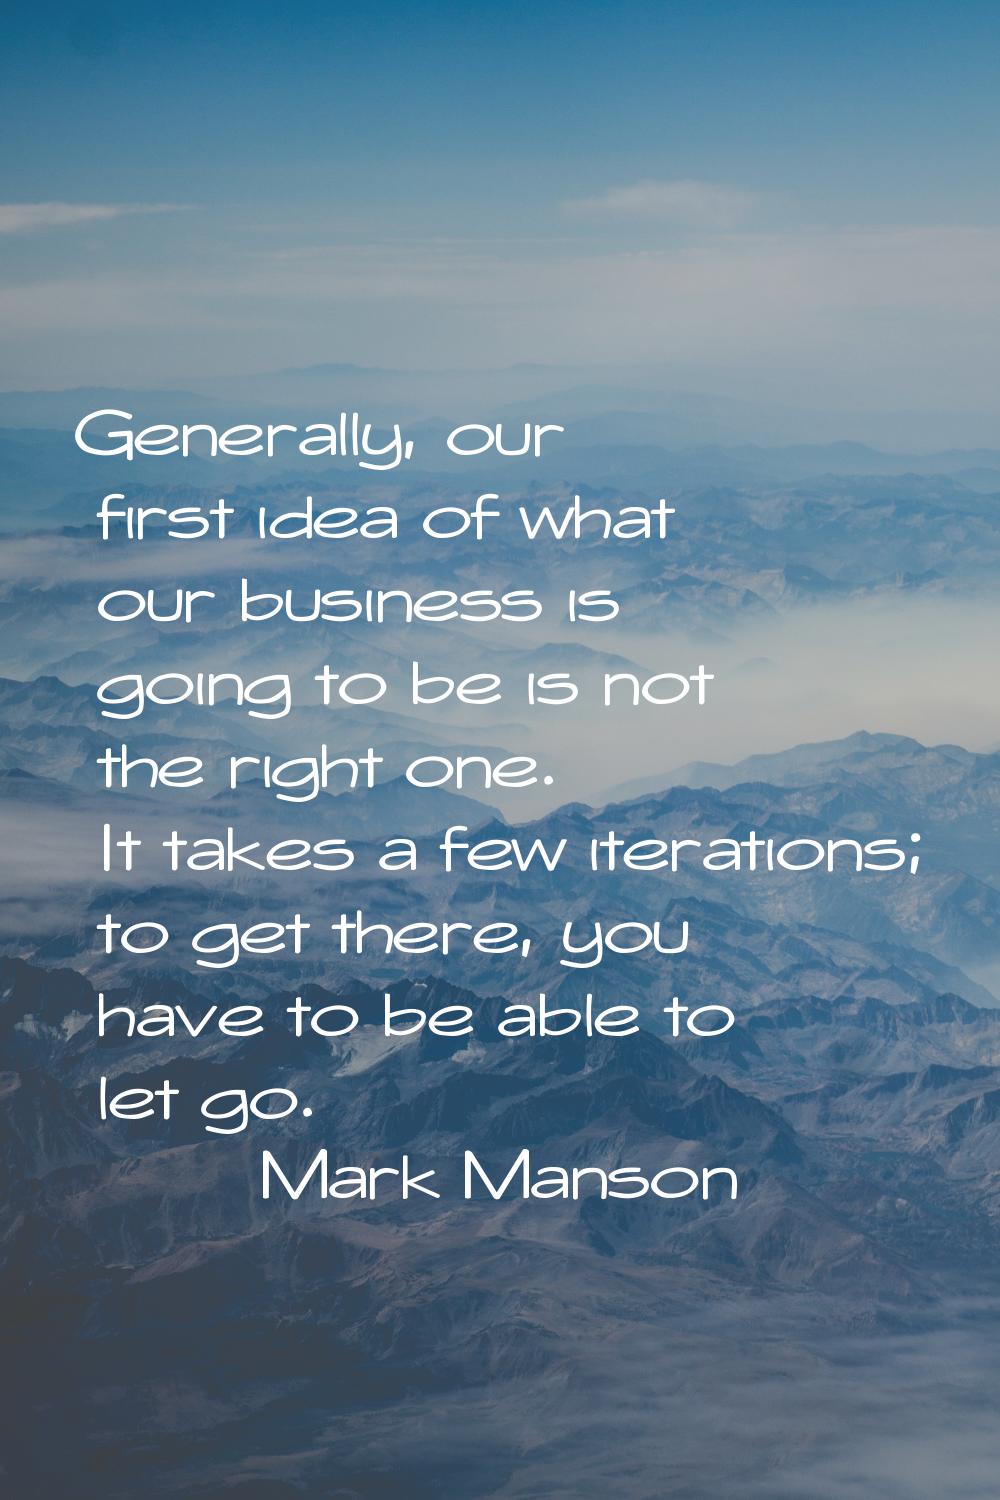 Generally, our first idea of what our business is going to be is not the right one. It takes a few 